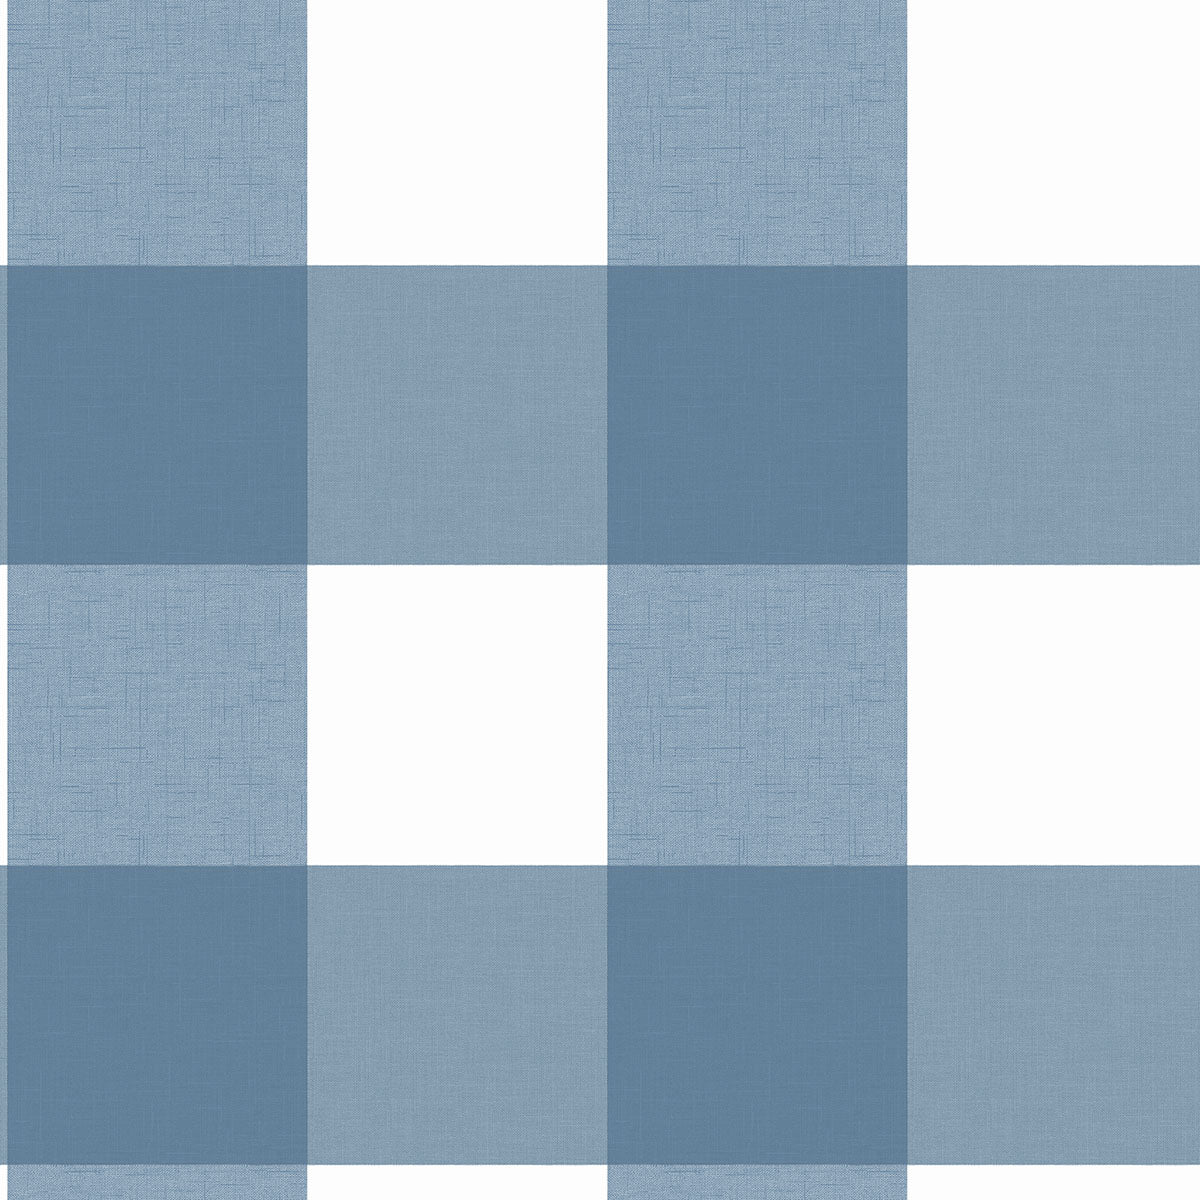 Purchase 3123-12533 Homestead Amos Navy Gingham Navy by Chesapeake Wallpaper